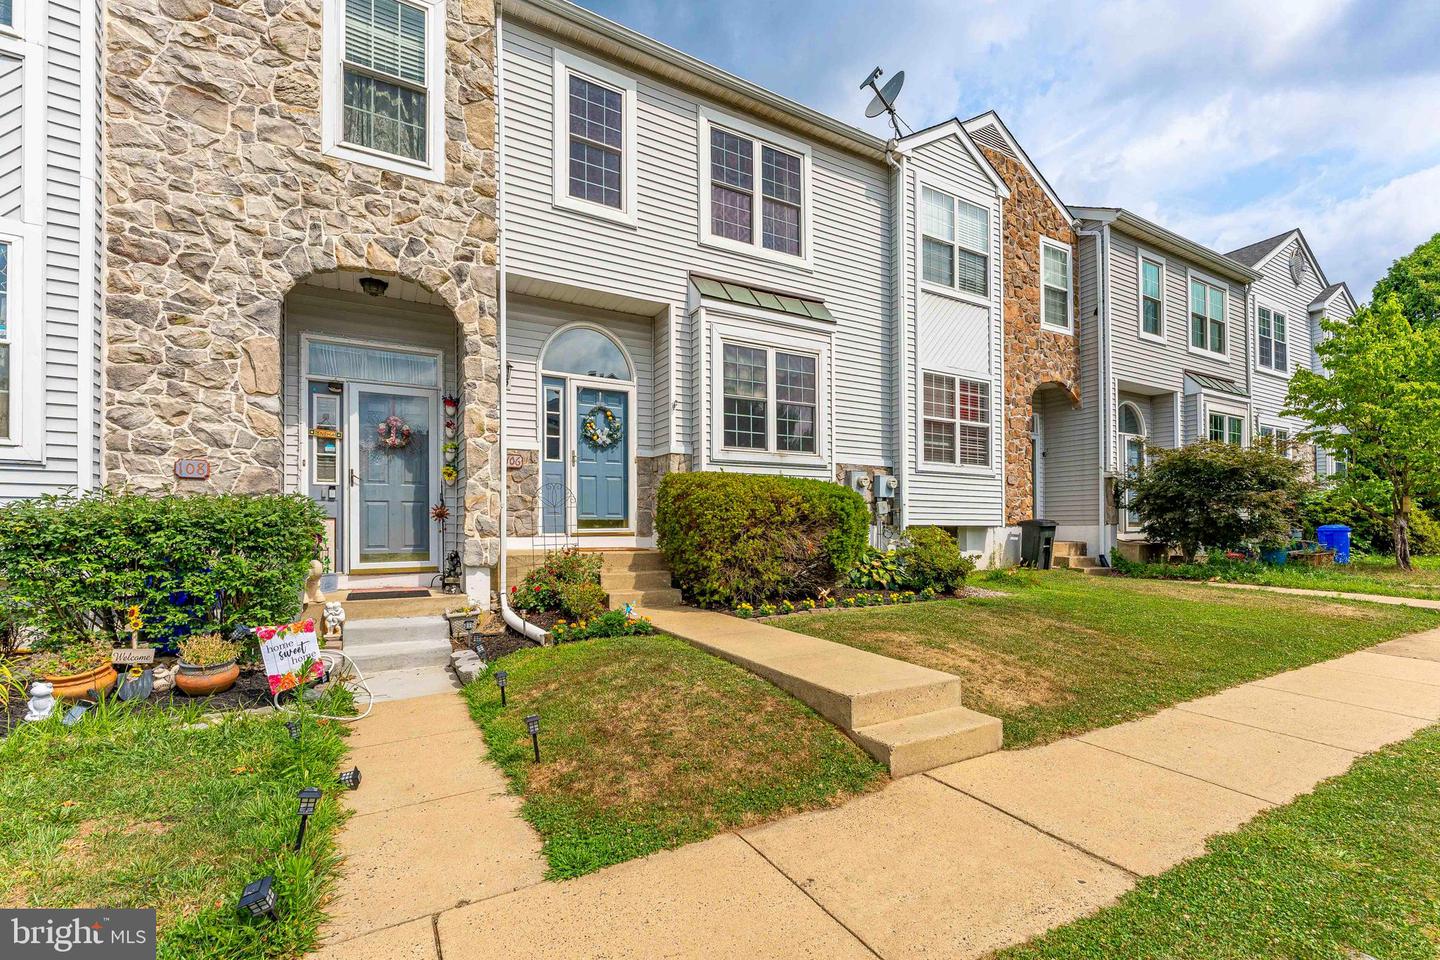 View Collegeville, PA 19426 townhome